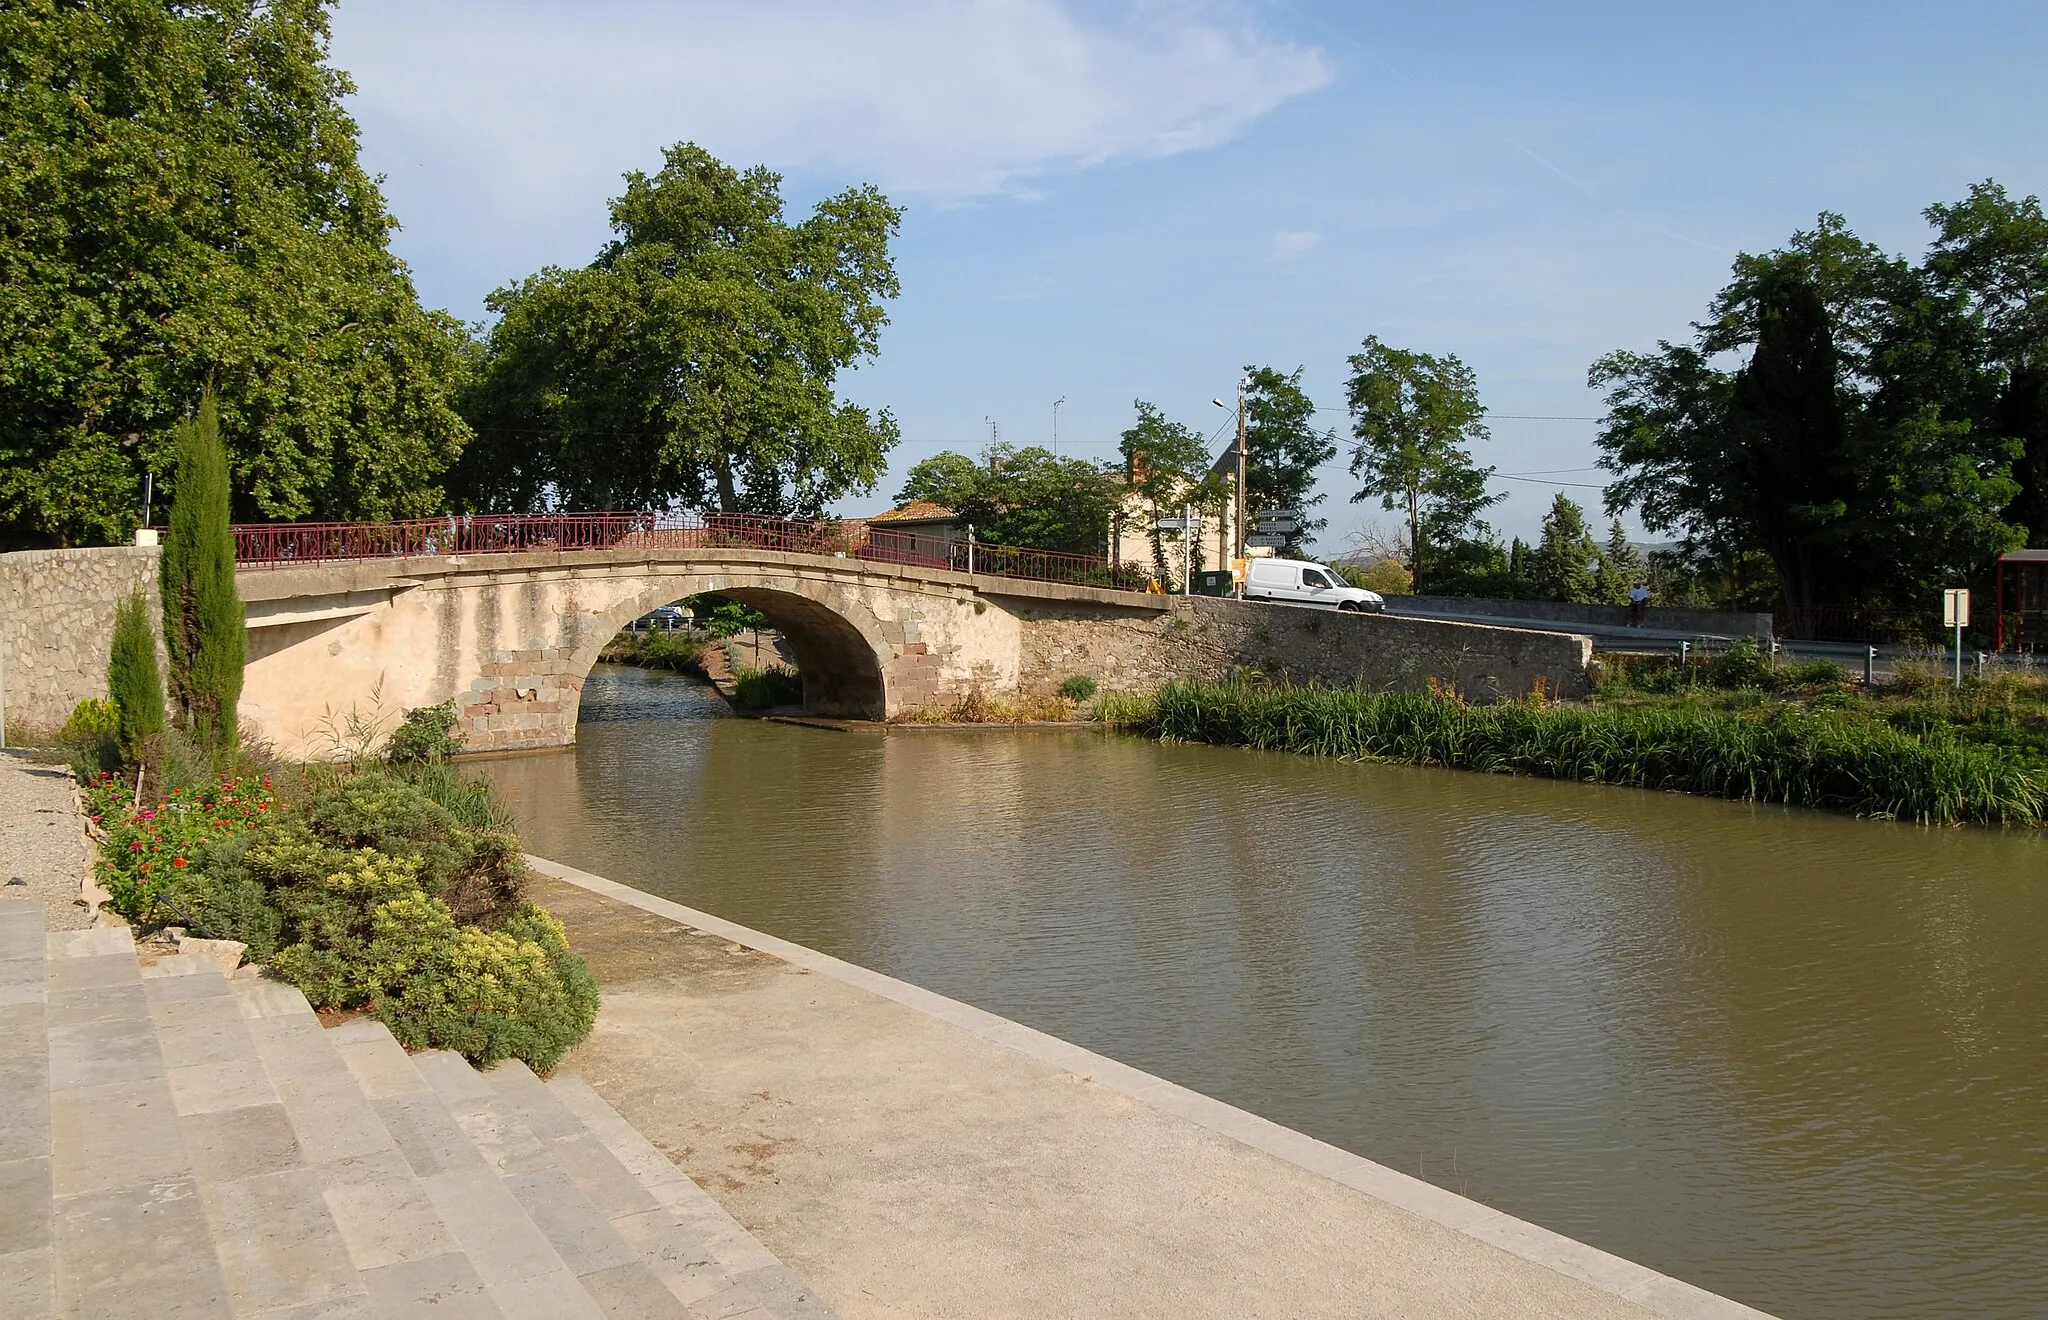 Photo showing: This place is a UNESCO World Heritage Site, listed as
Canal du Midi.